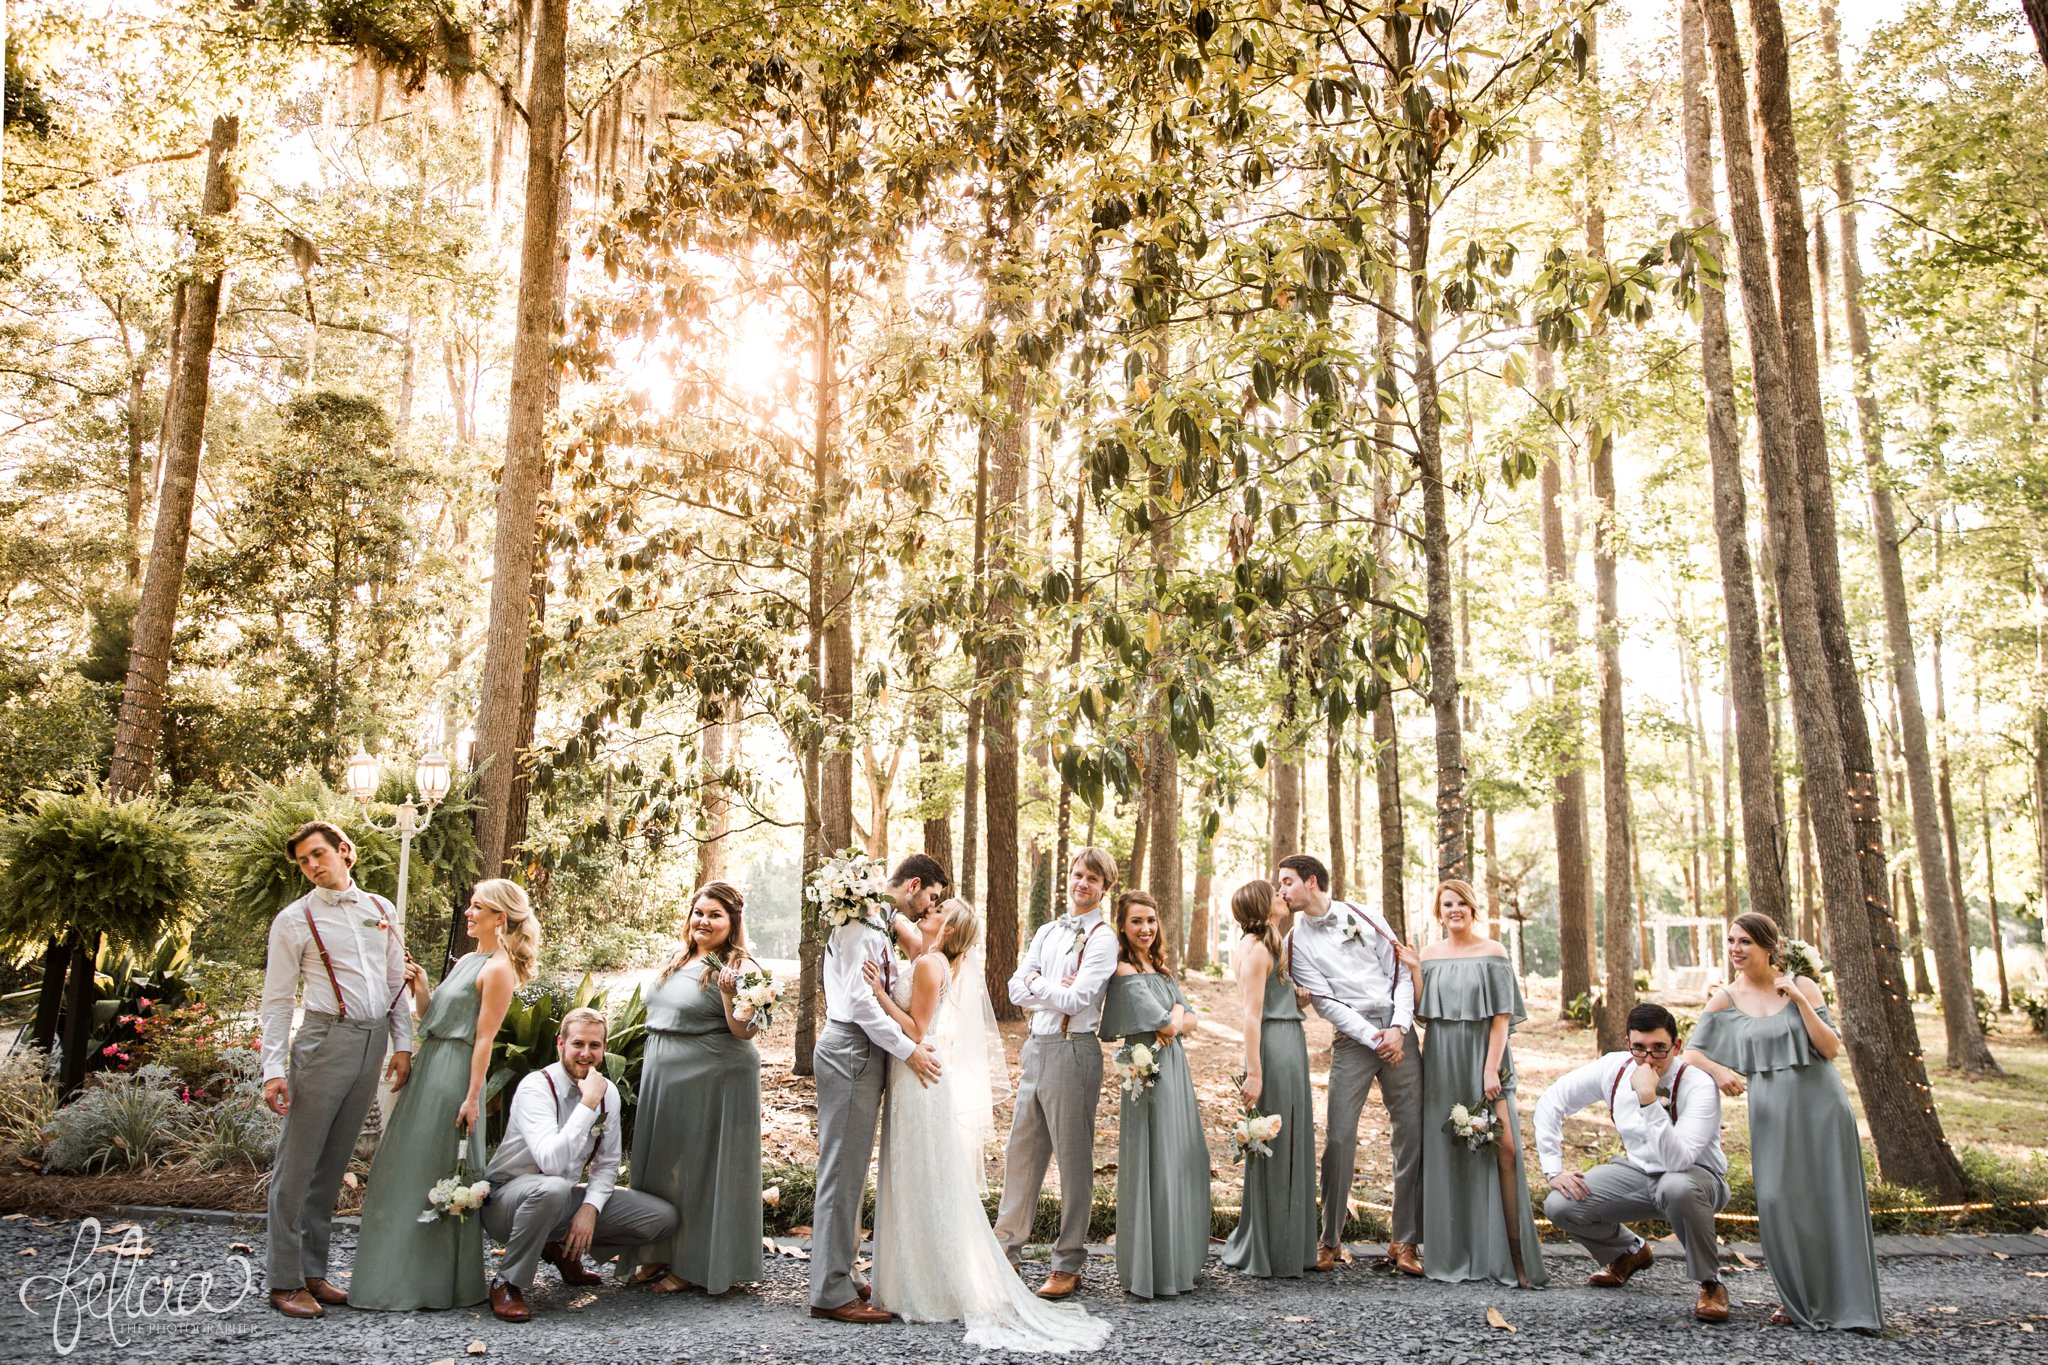 images by feliciathephotographer.com | destination wedding | the makey house | dave gibson coordinator | travel photographer | Savannah, georgia | southern | portrait | bridal party | kiss | true love | forest | trees | green | golden hour | silly pose | friends | 